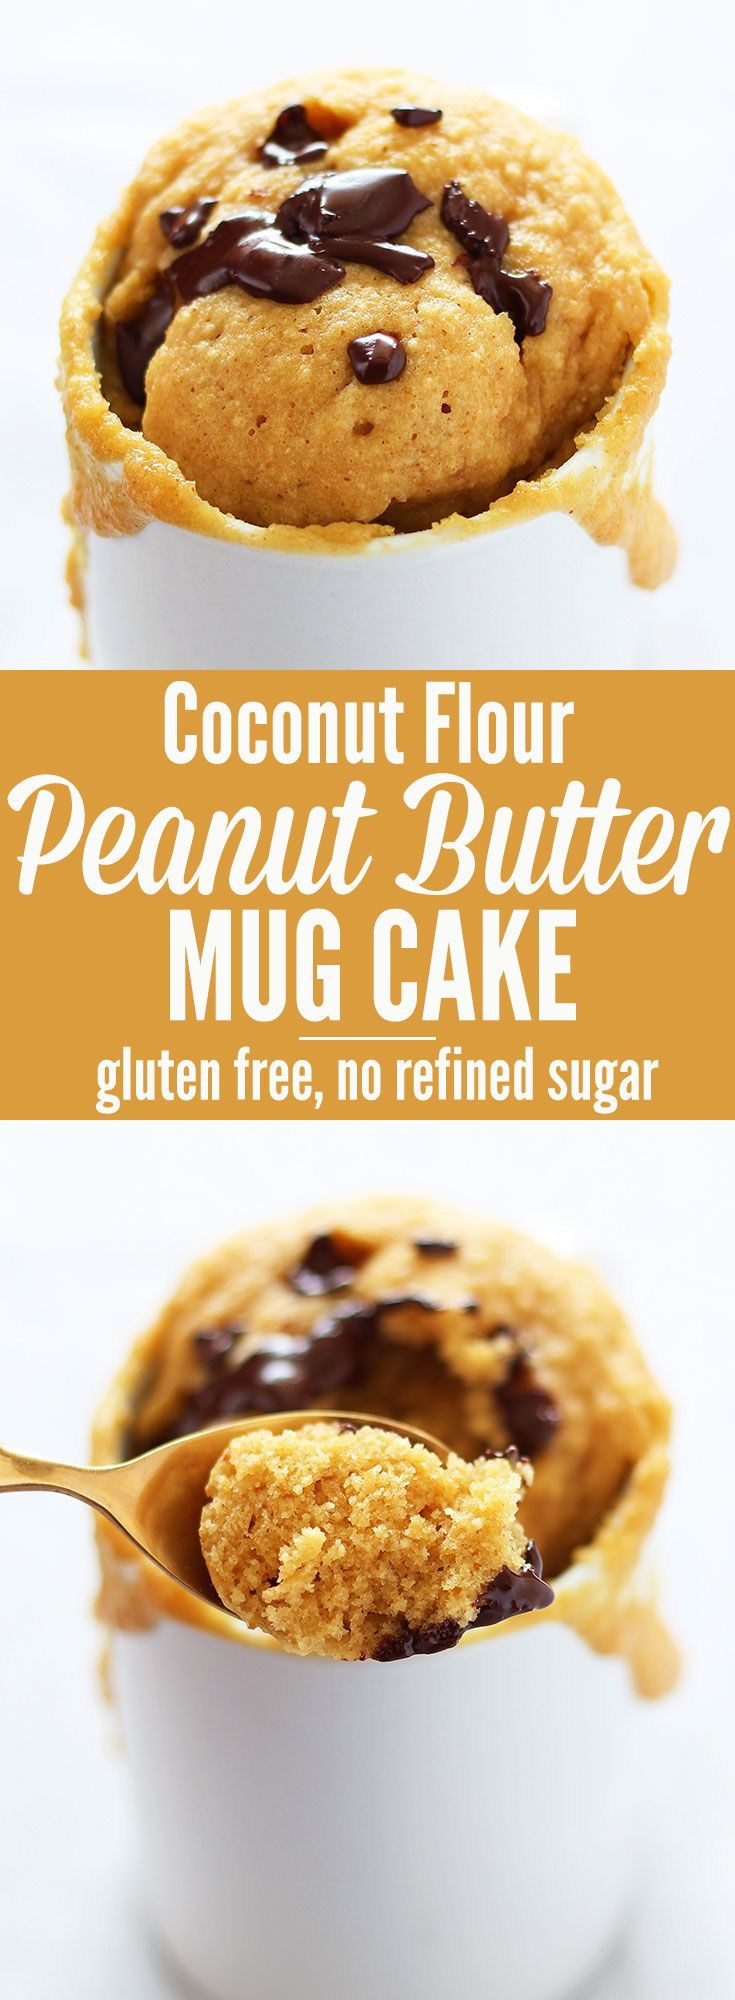 Low Carb Cake Recipes Almond Flour
 Peanut Butter Mug Cake for dessert in a flash This